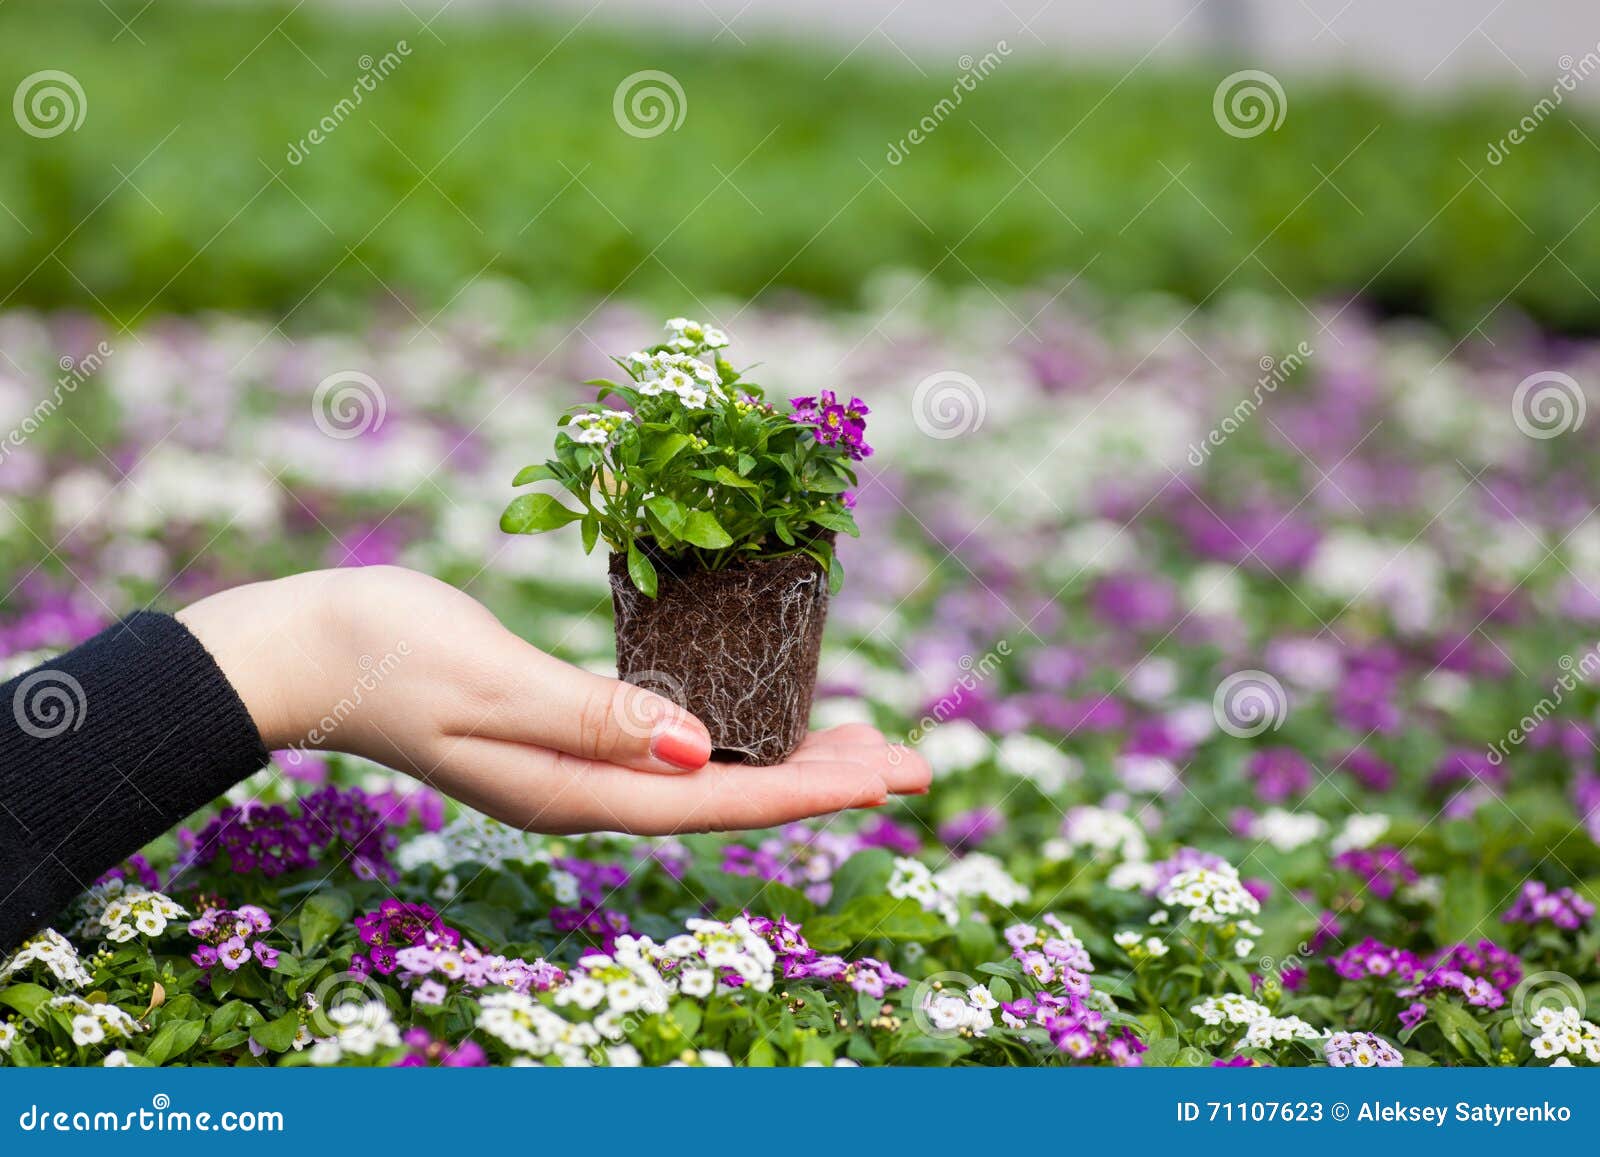 seedling holding close up of pretty pink, white and purple alyssum flowers, the cruciferae annual flowering plant